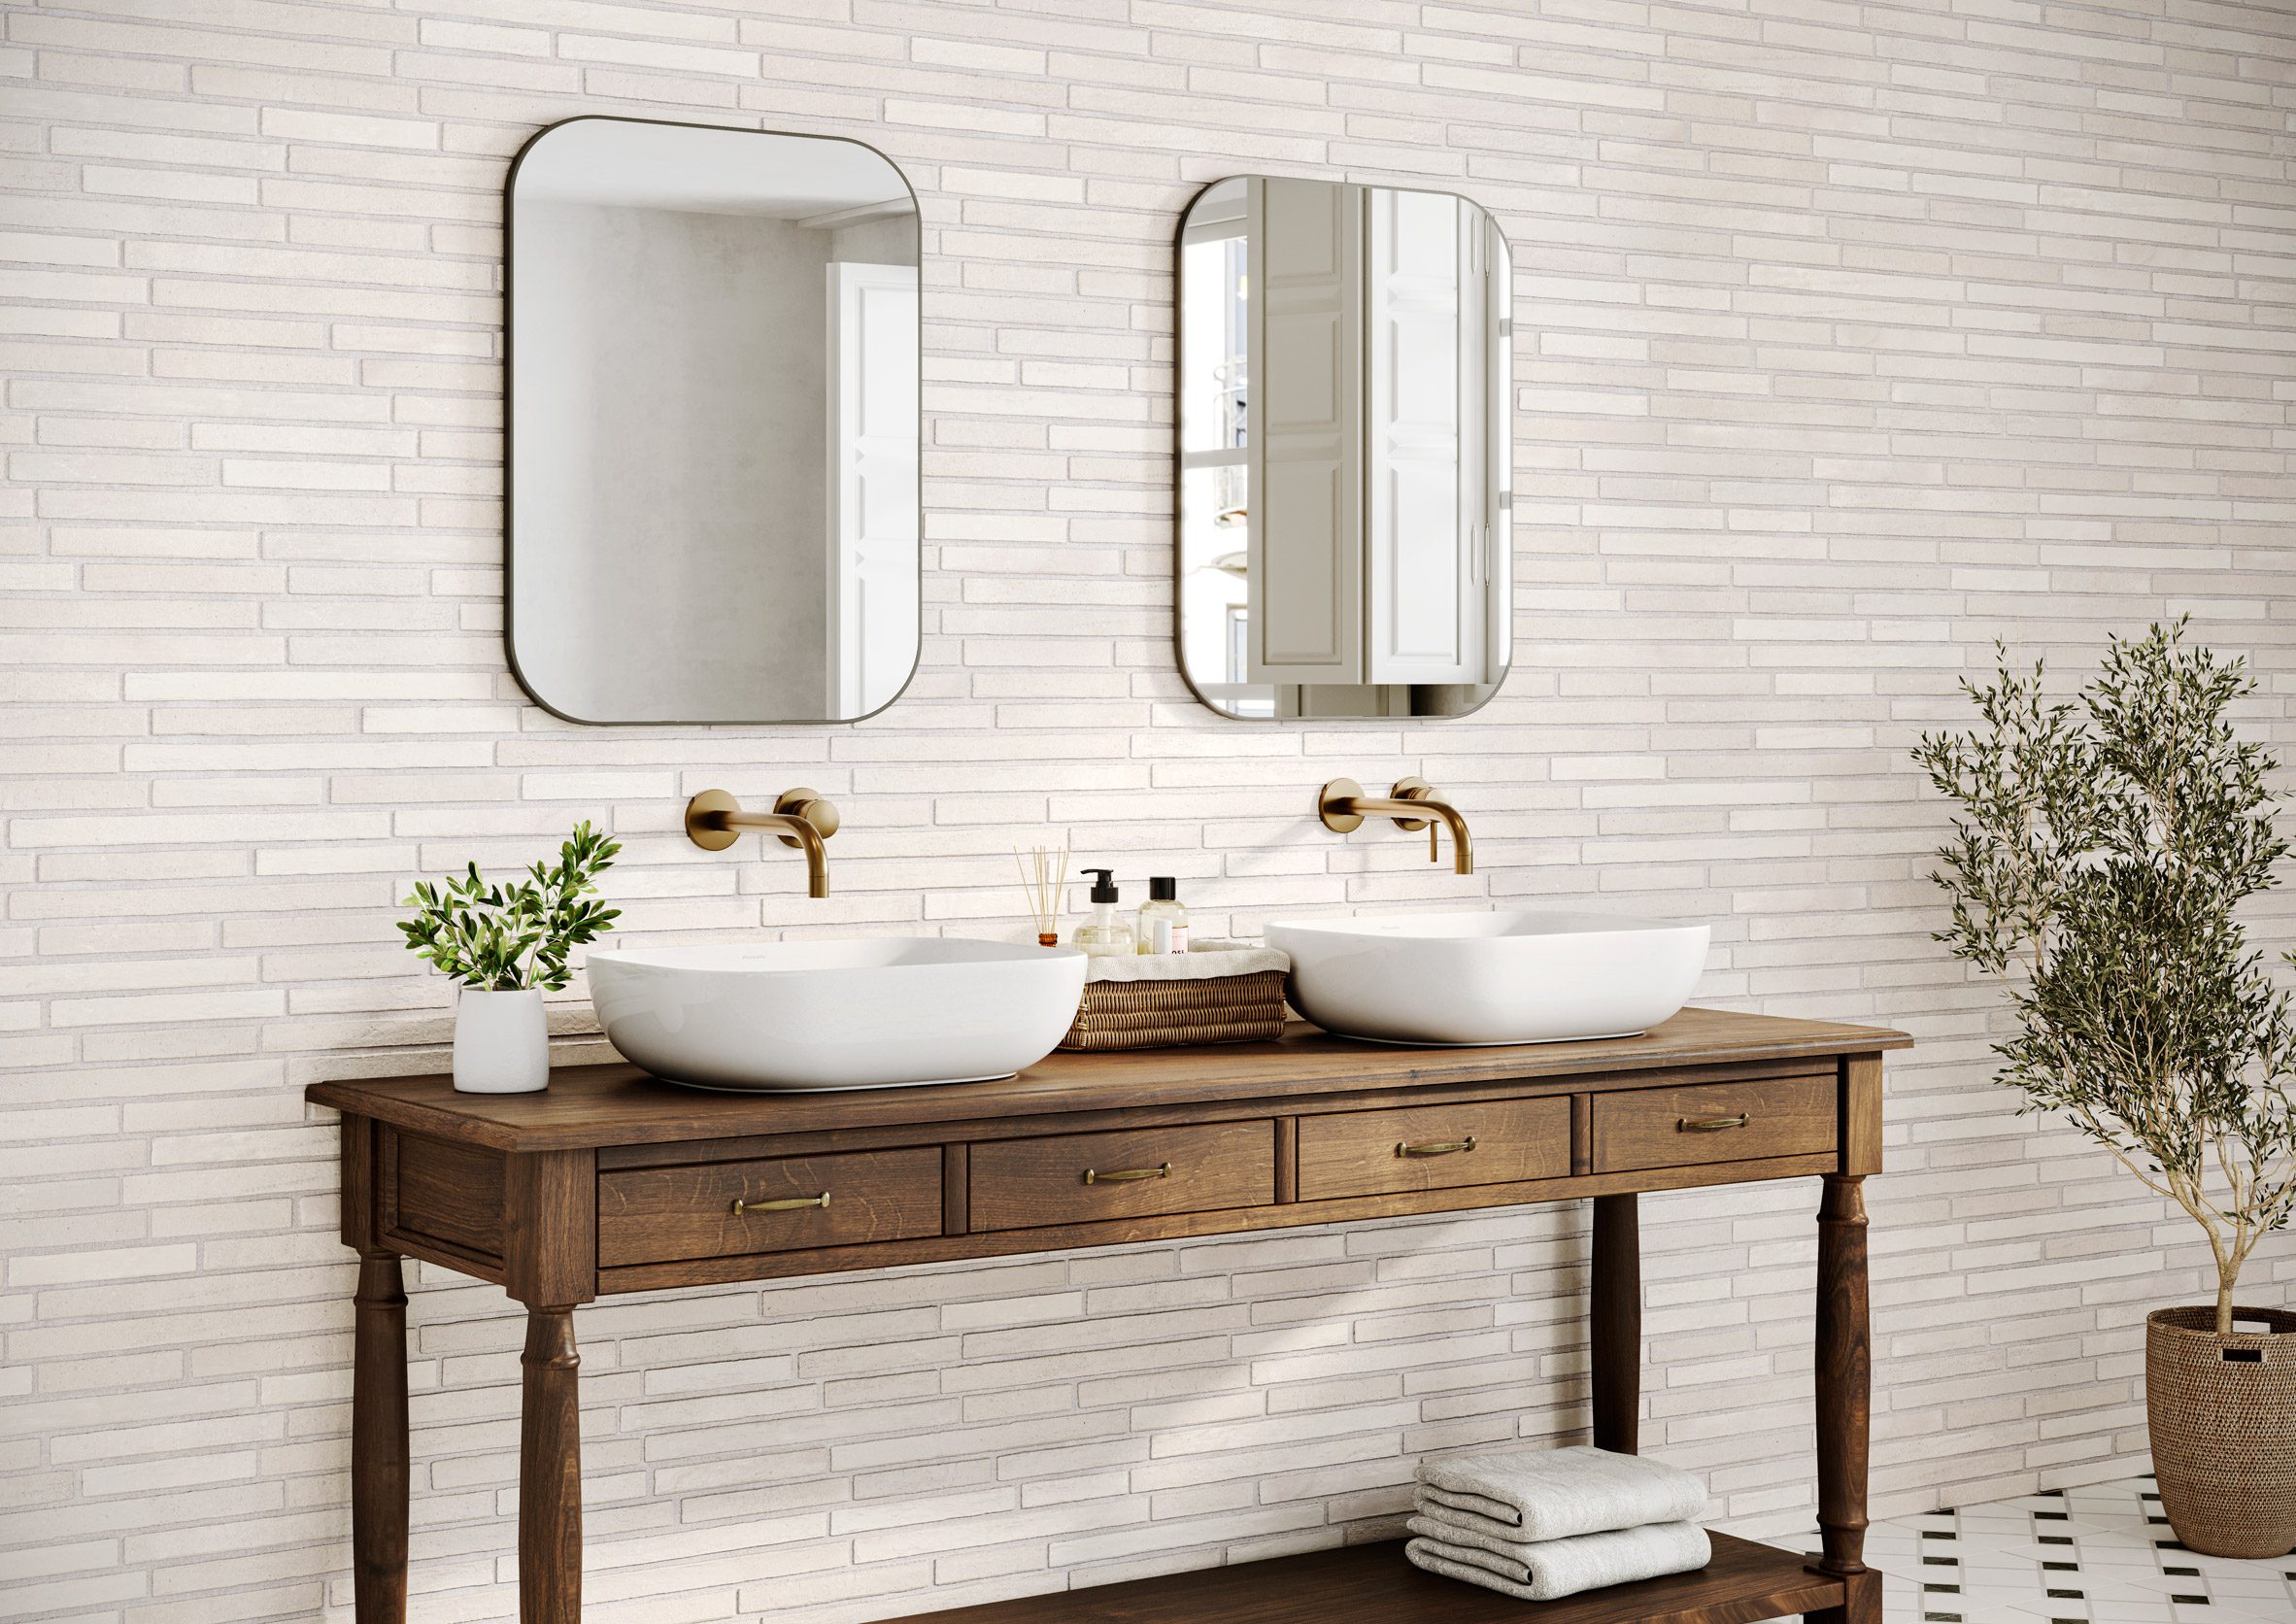 Amsterdam tile collection by Realonda